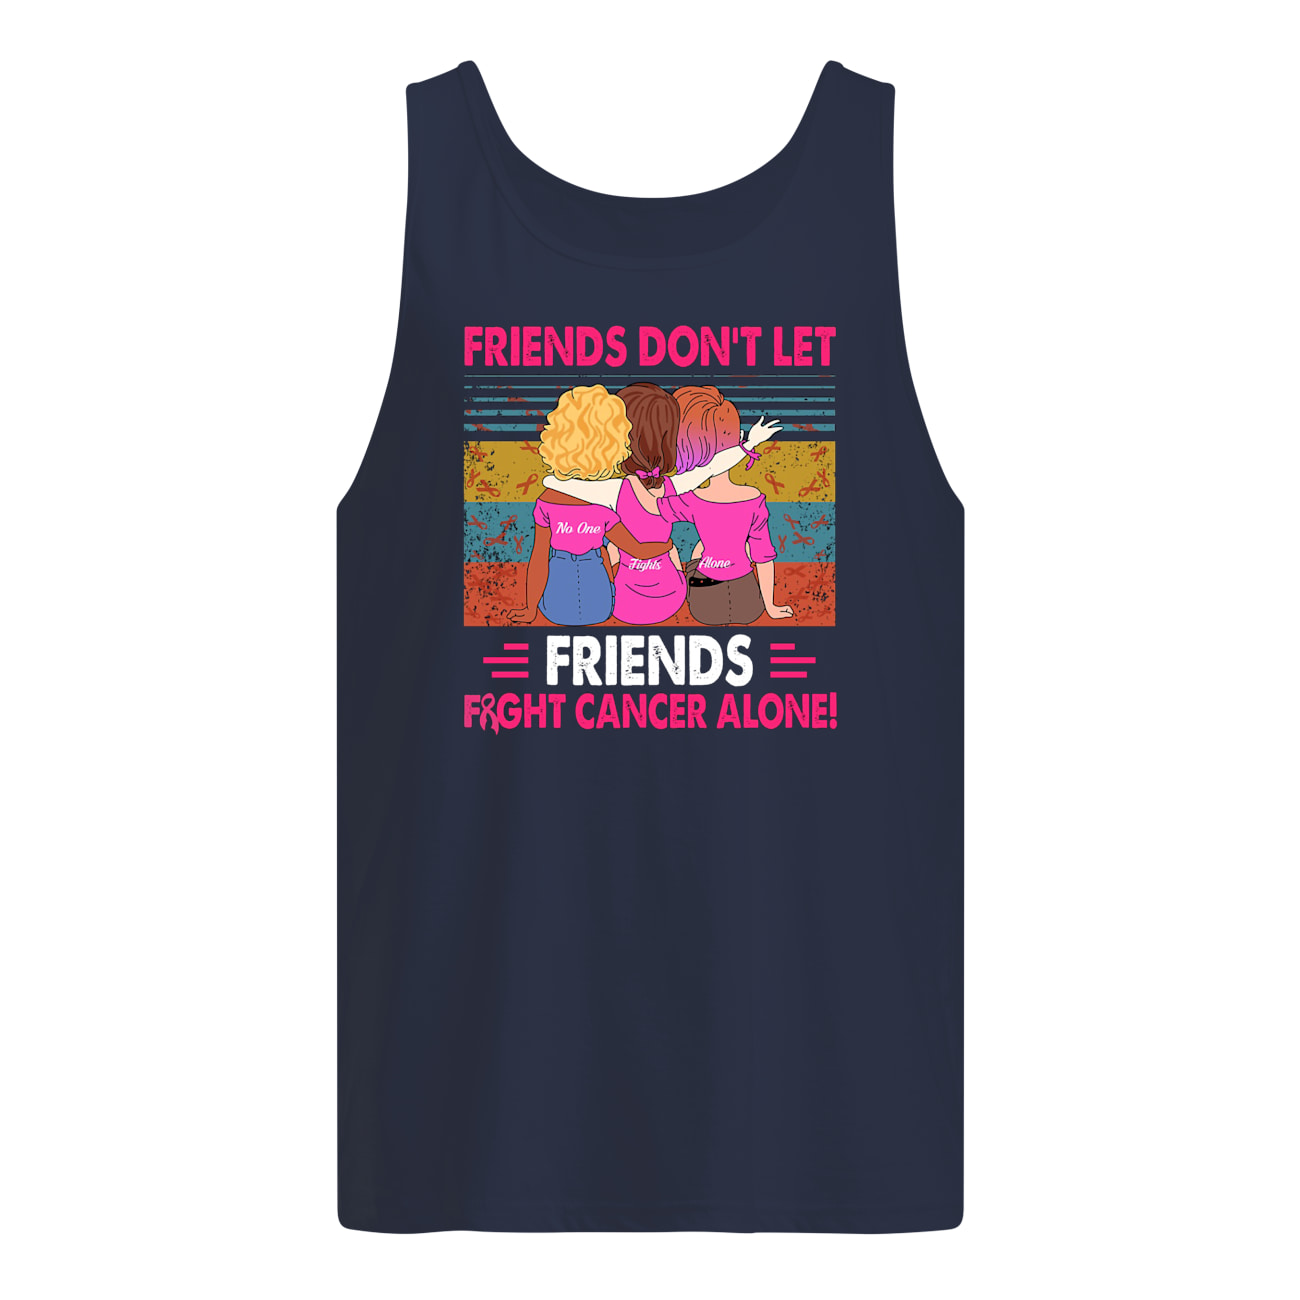 Vintage friends don't let friends fight cancer alone tank top